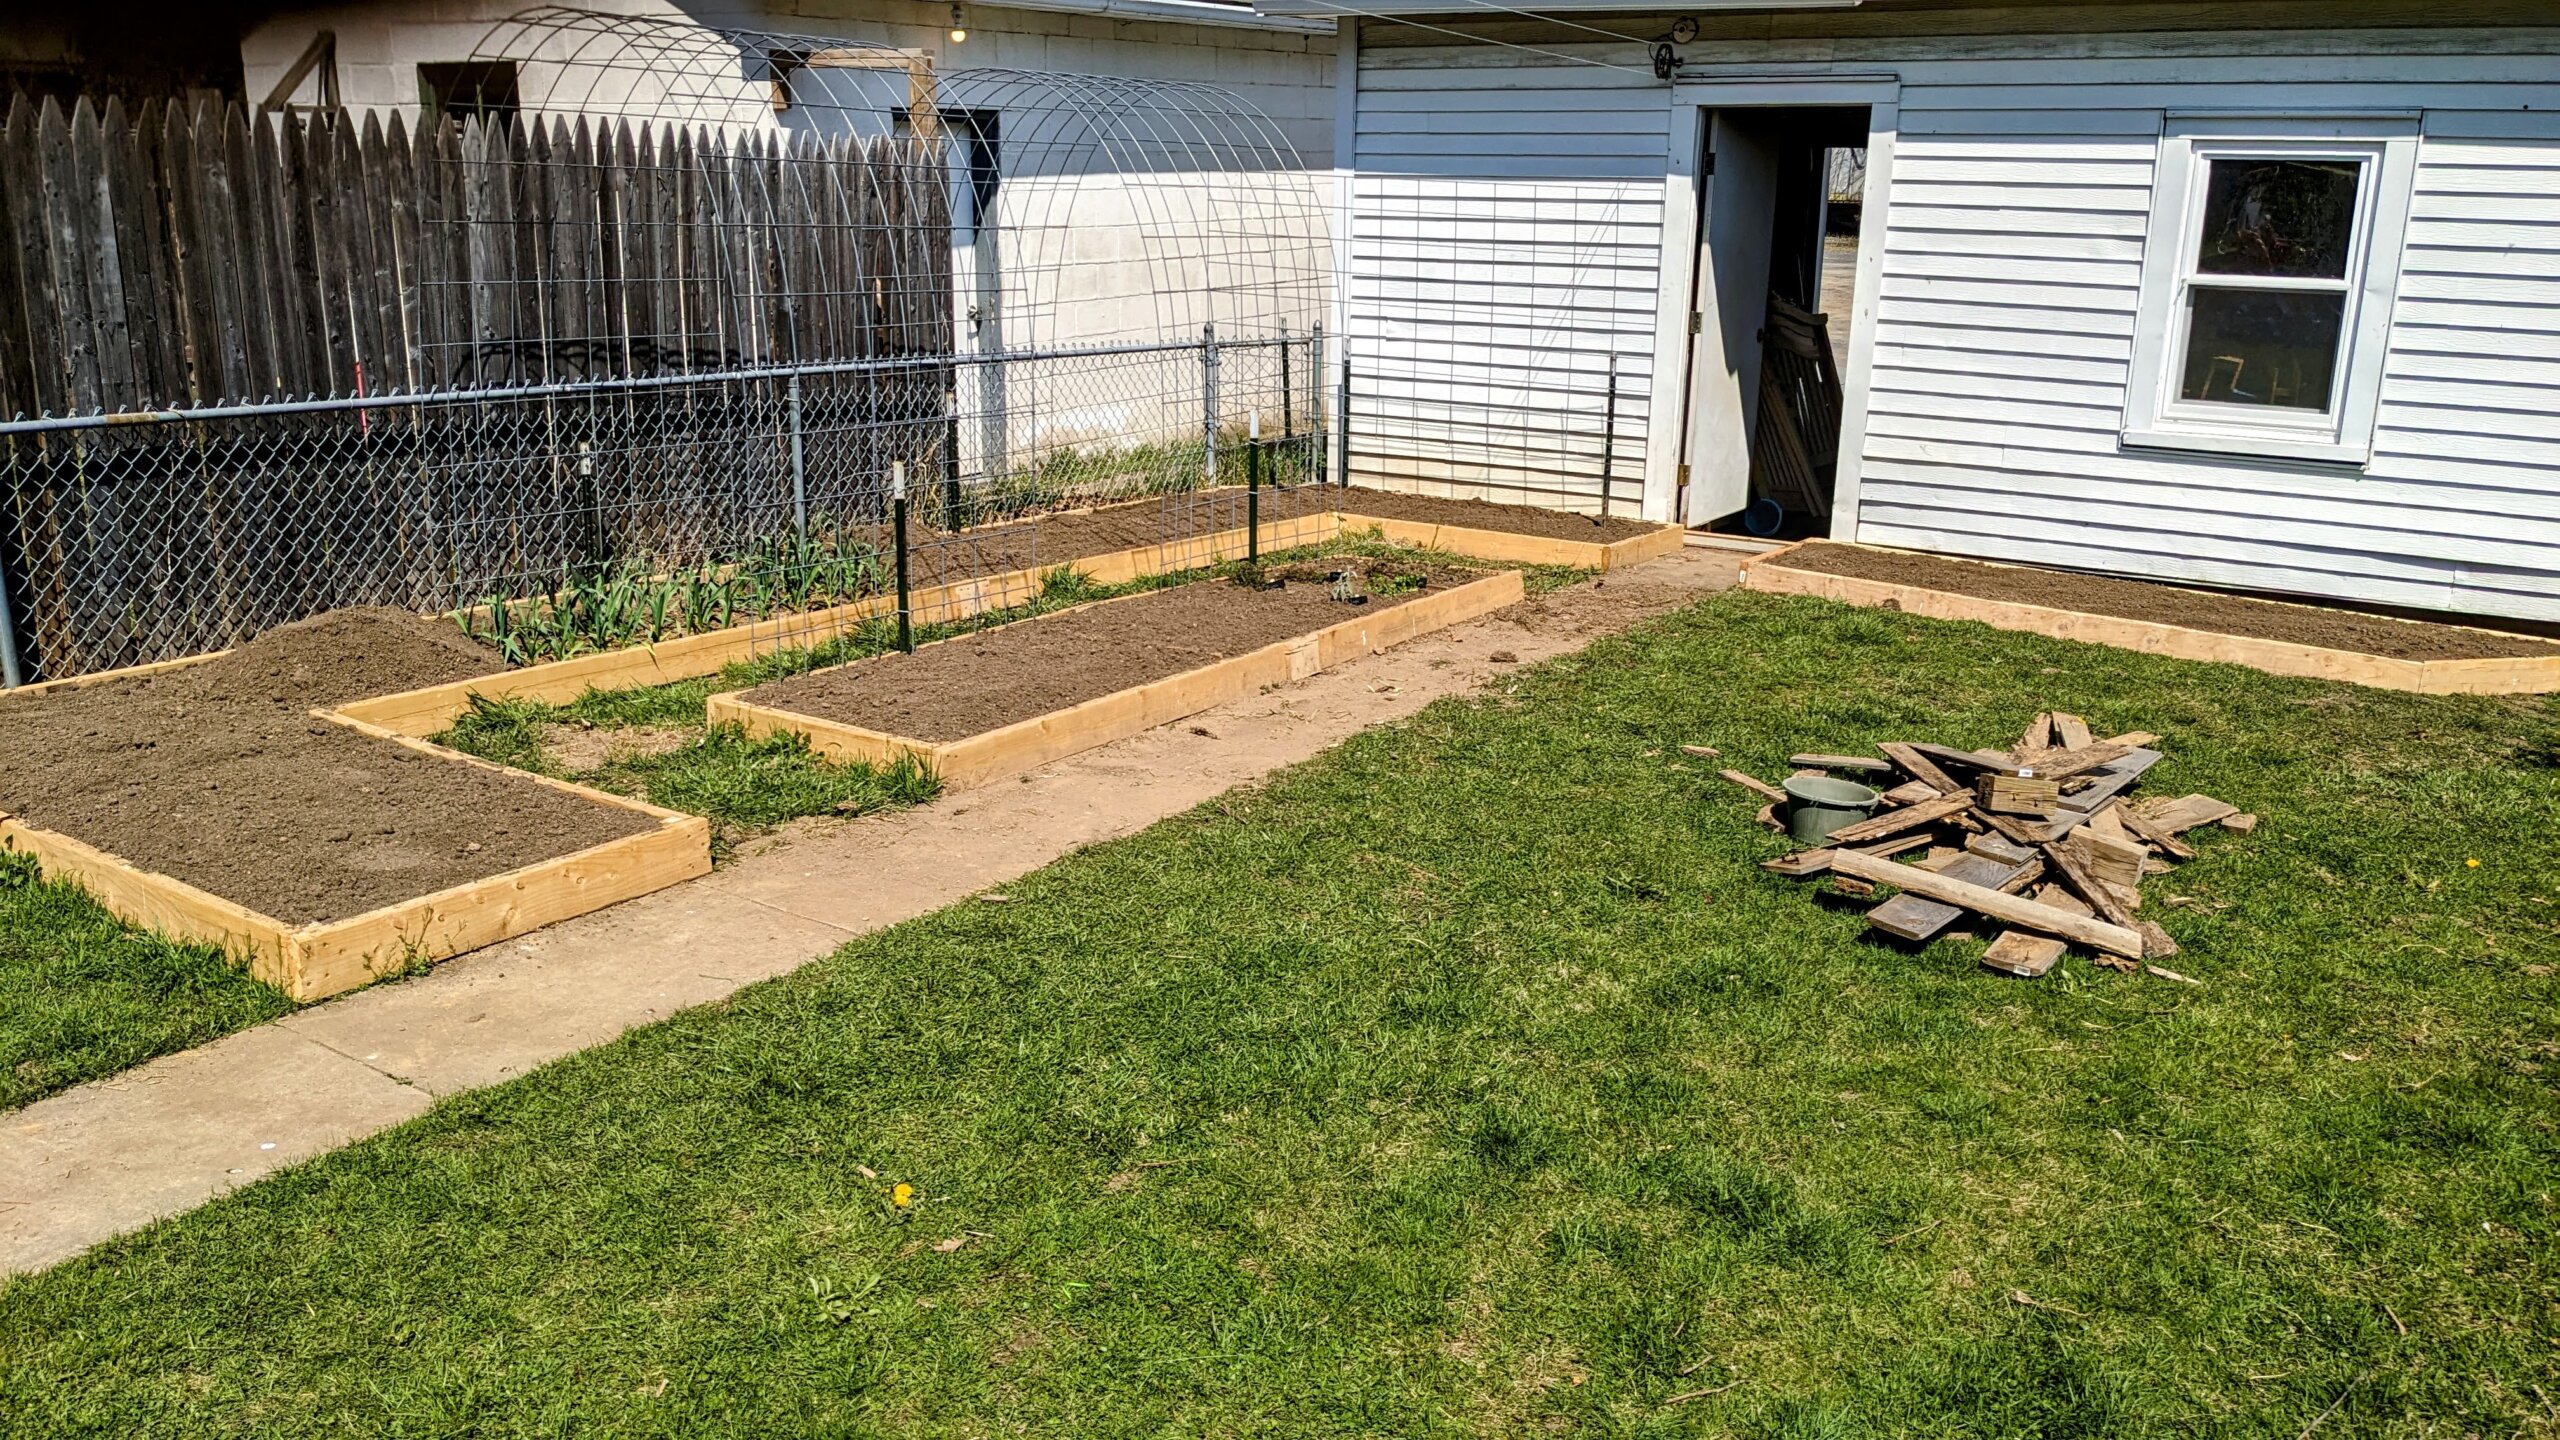 DIY Raised Beds for a Small Backyard